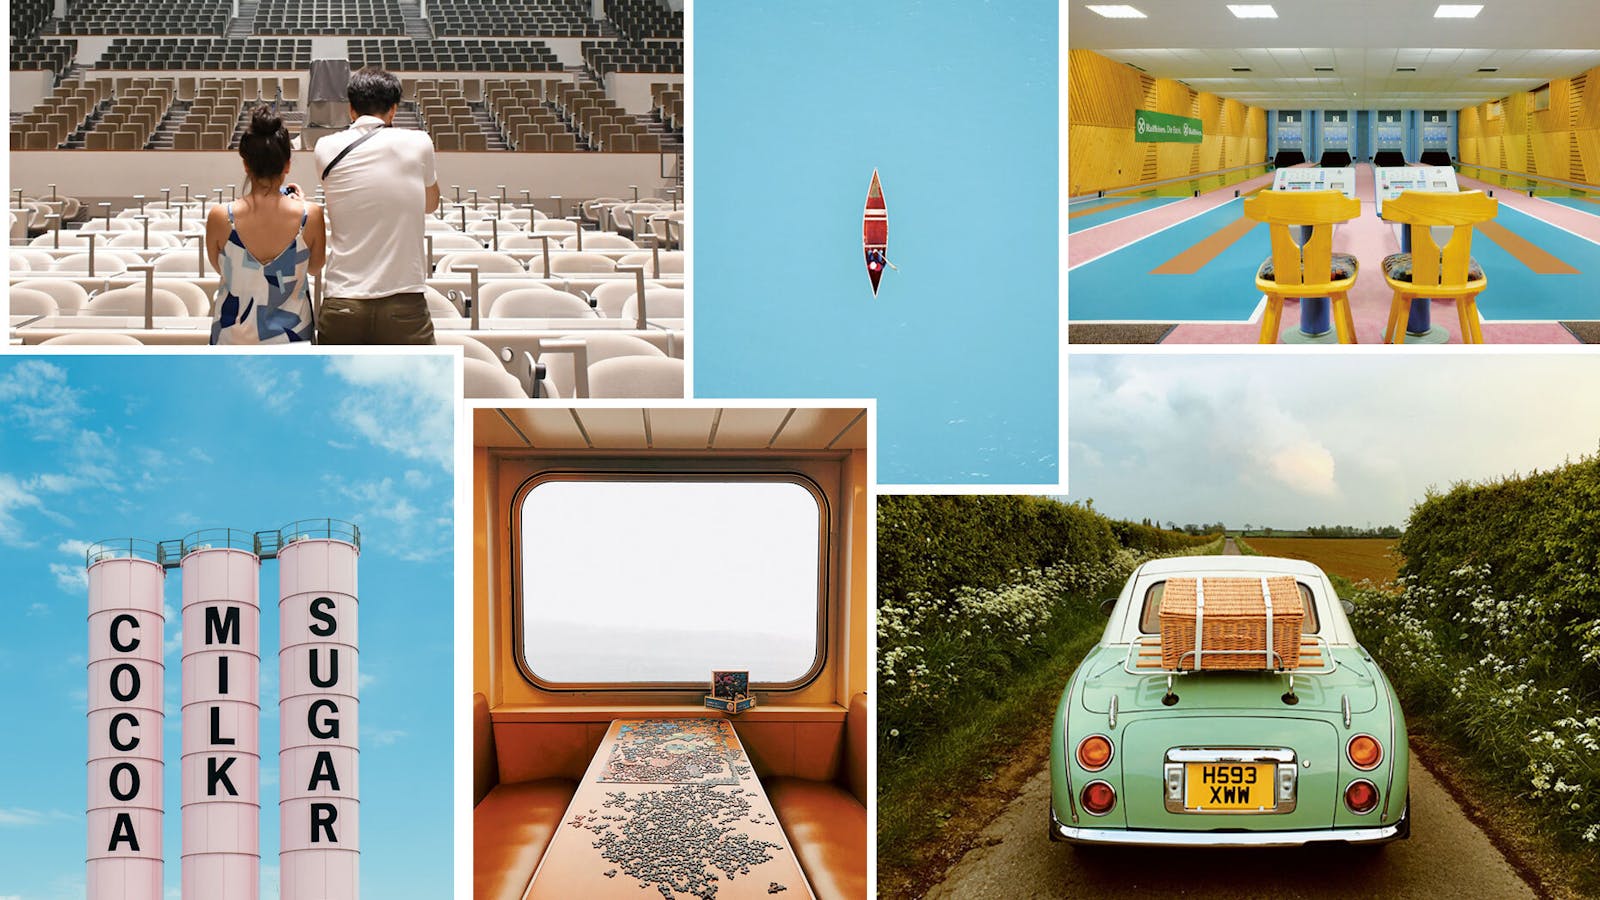 Dive into the world of Accidentally Wes Anderson